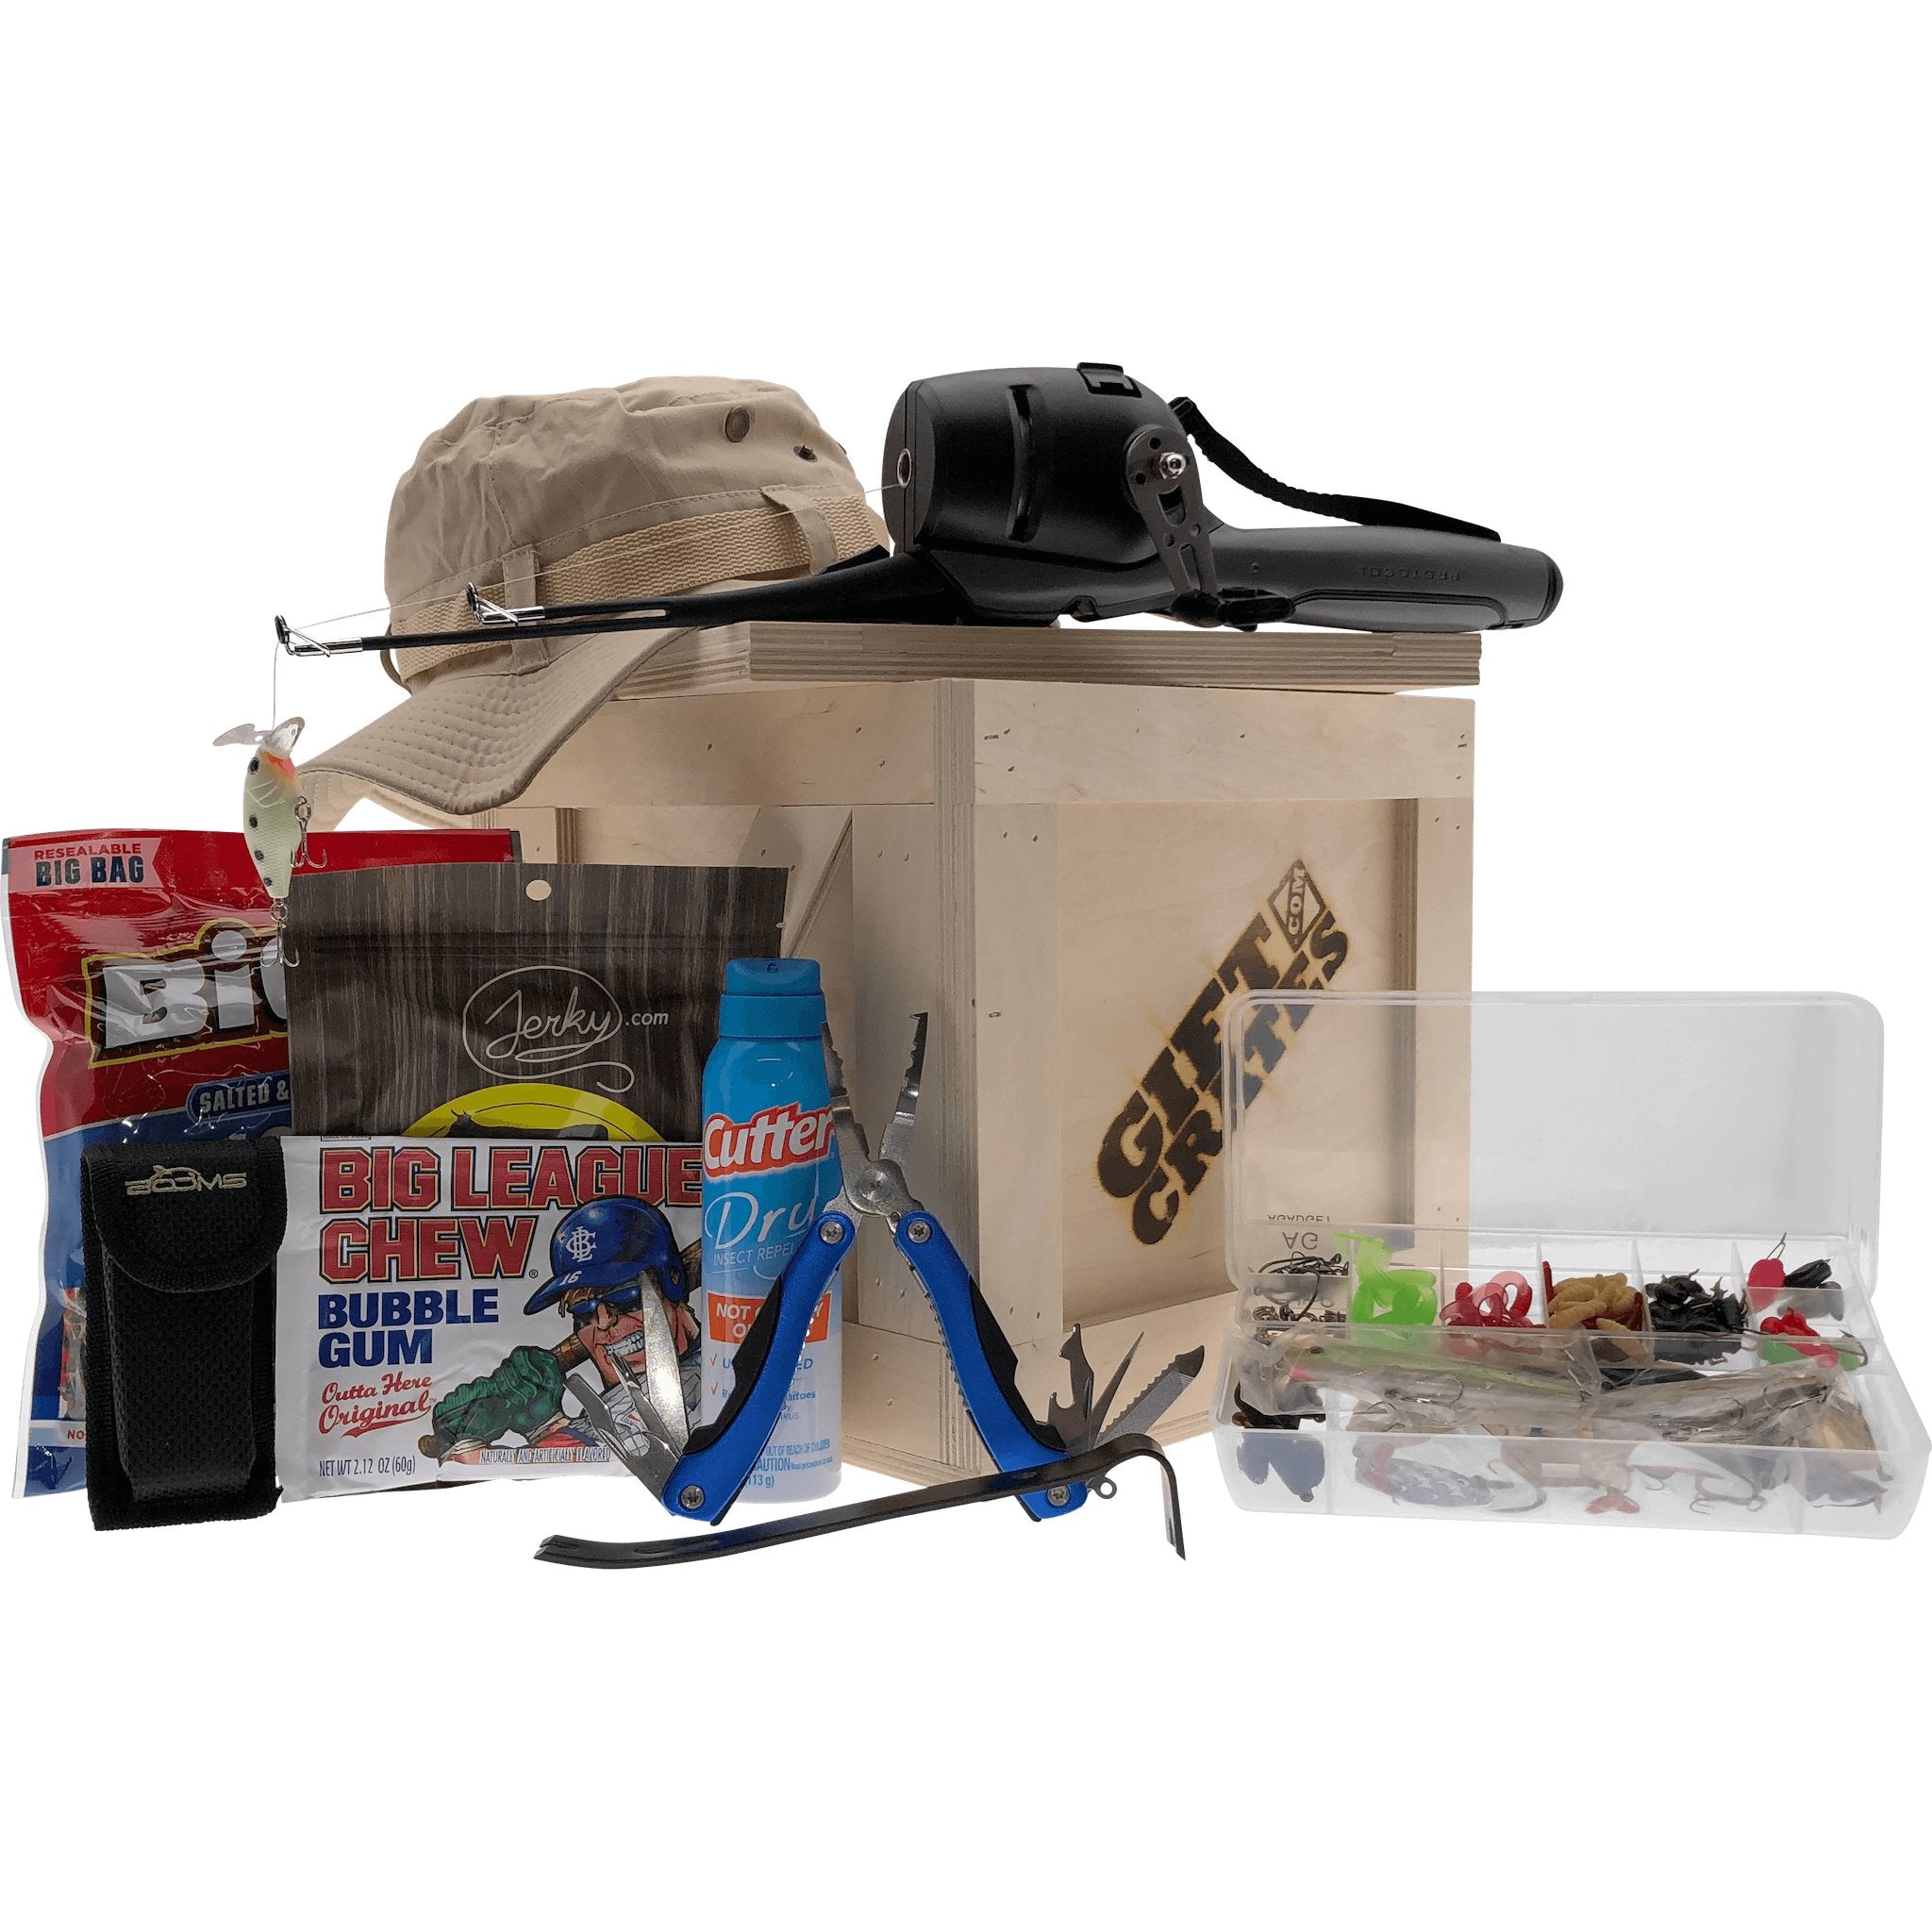 Fishing Gift Crate - Gift Crates